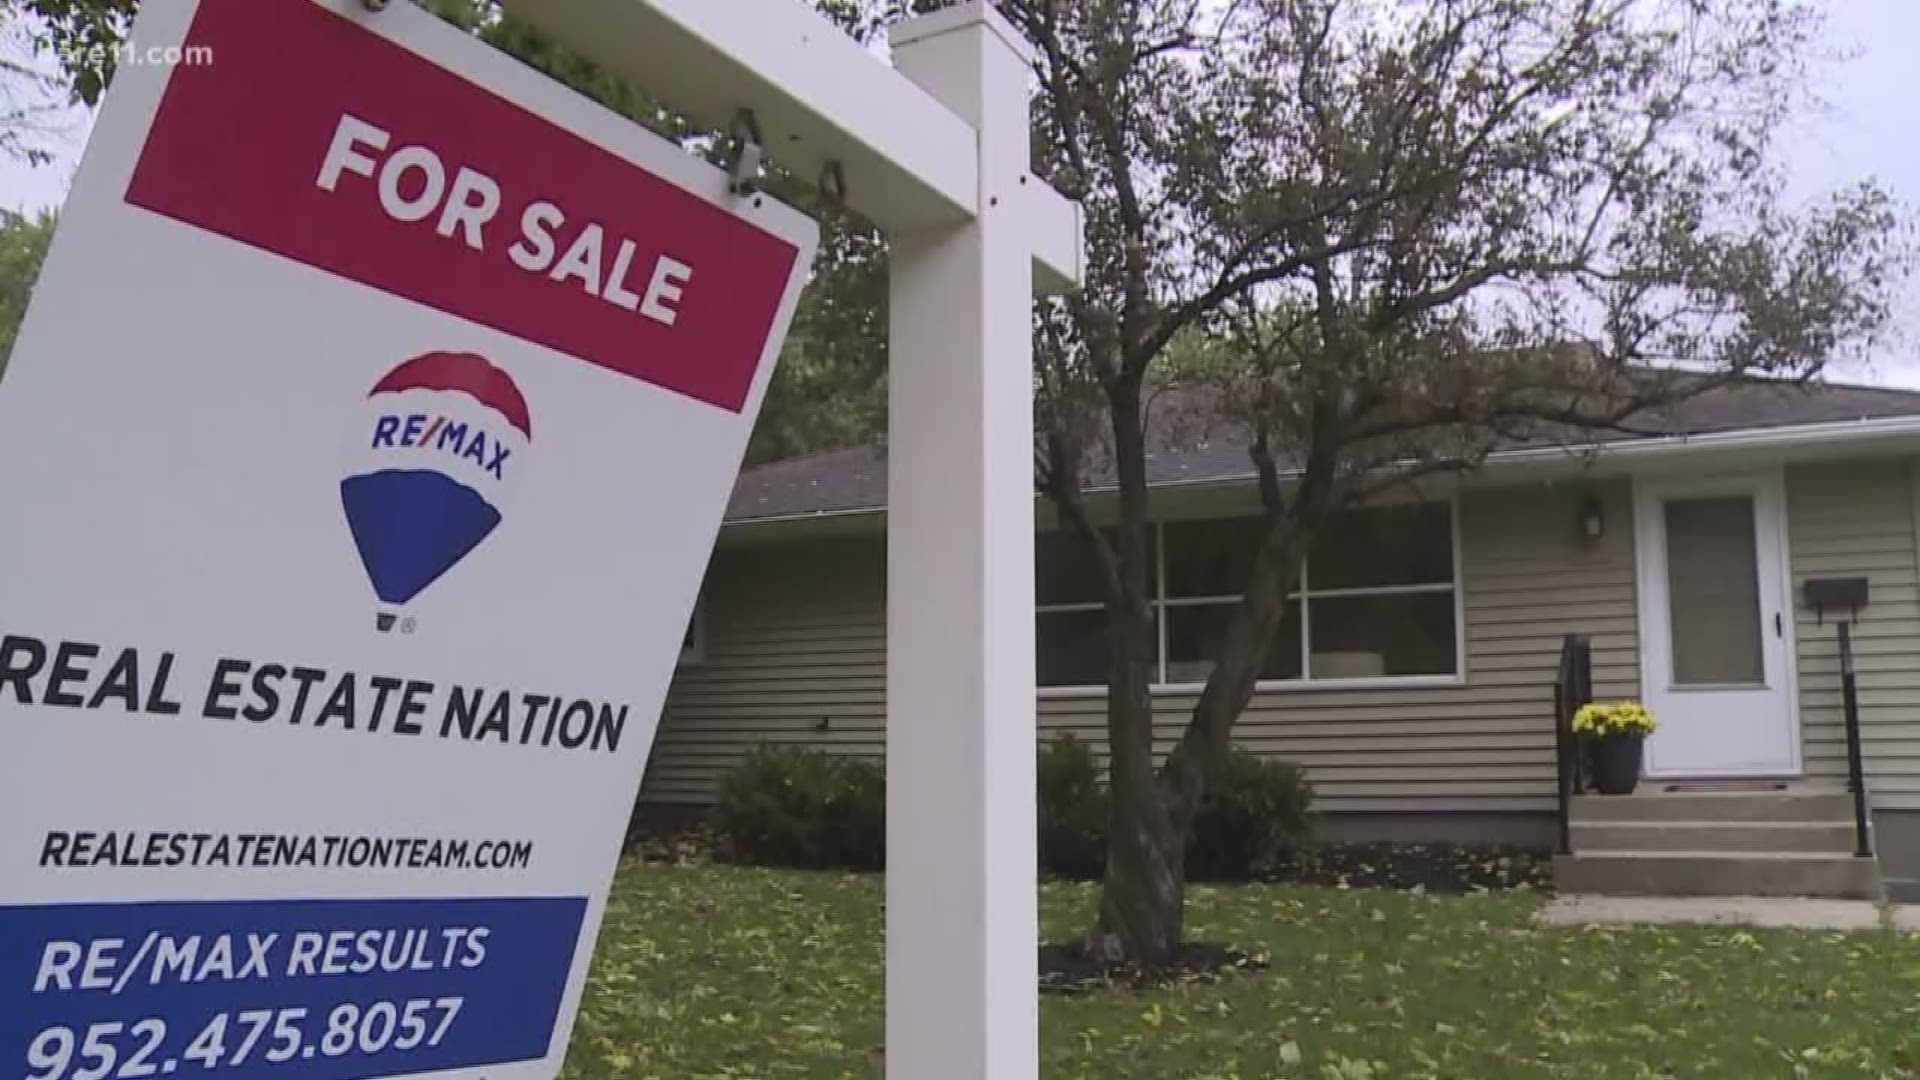 Real estate sales are at a 3 year low, while prices jump to all time high.